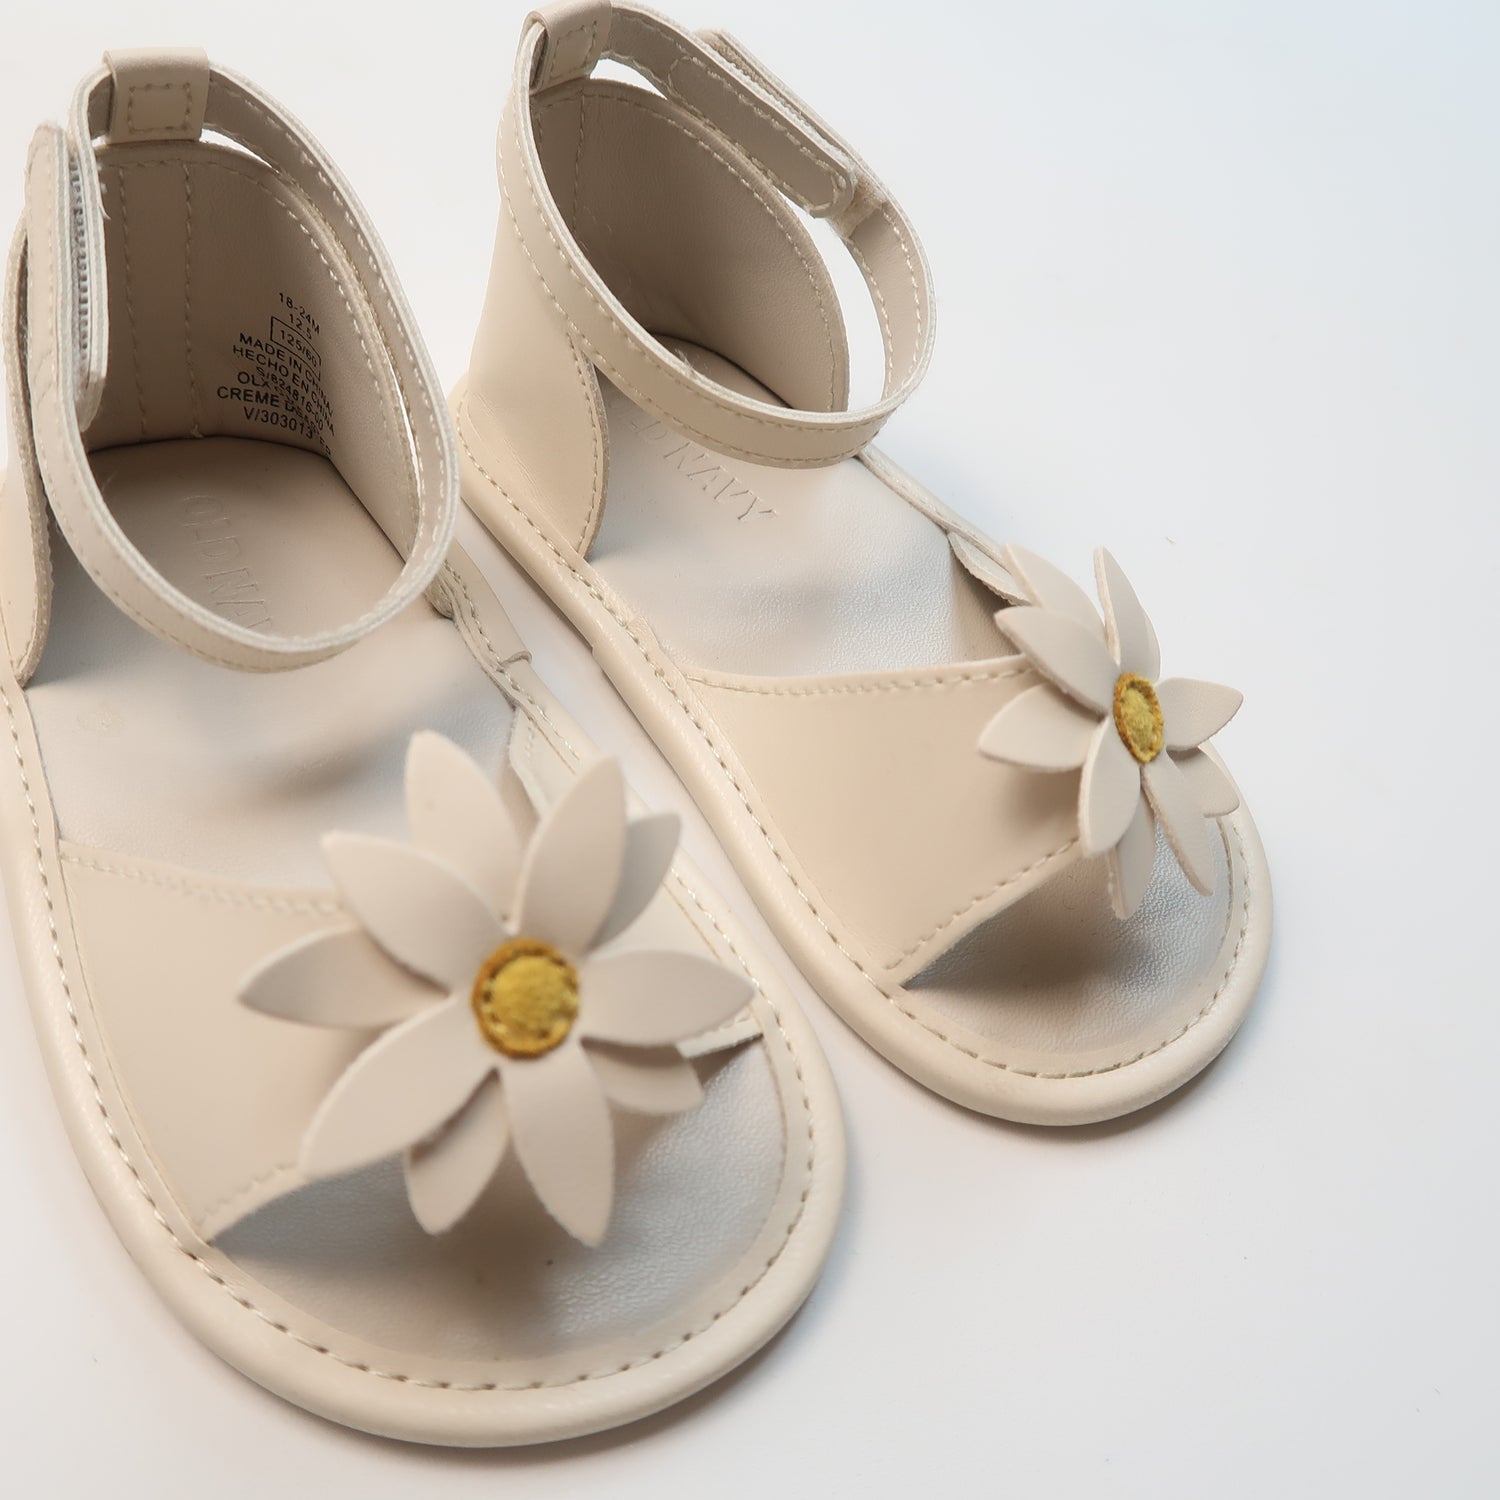 Old Navy - Sandals (Shoes - 18-24M)